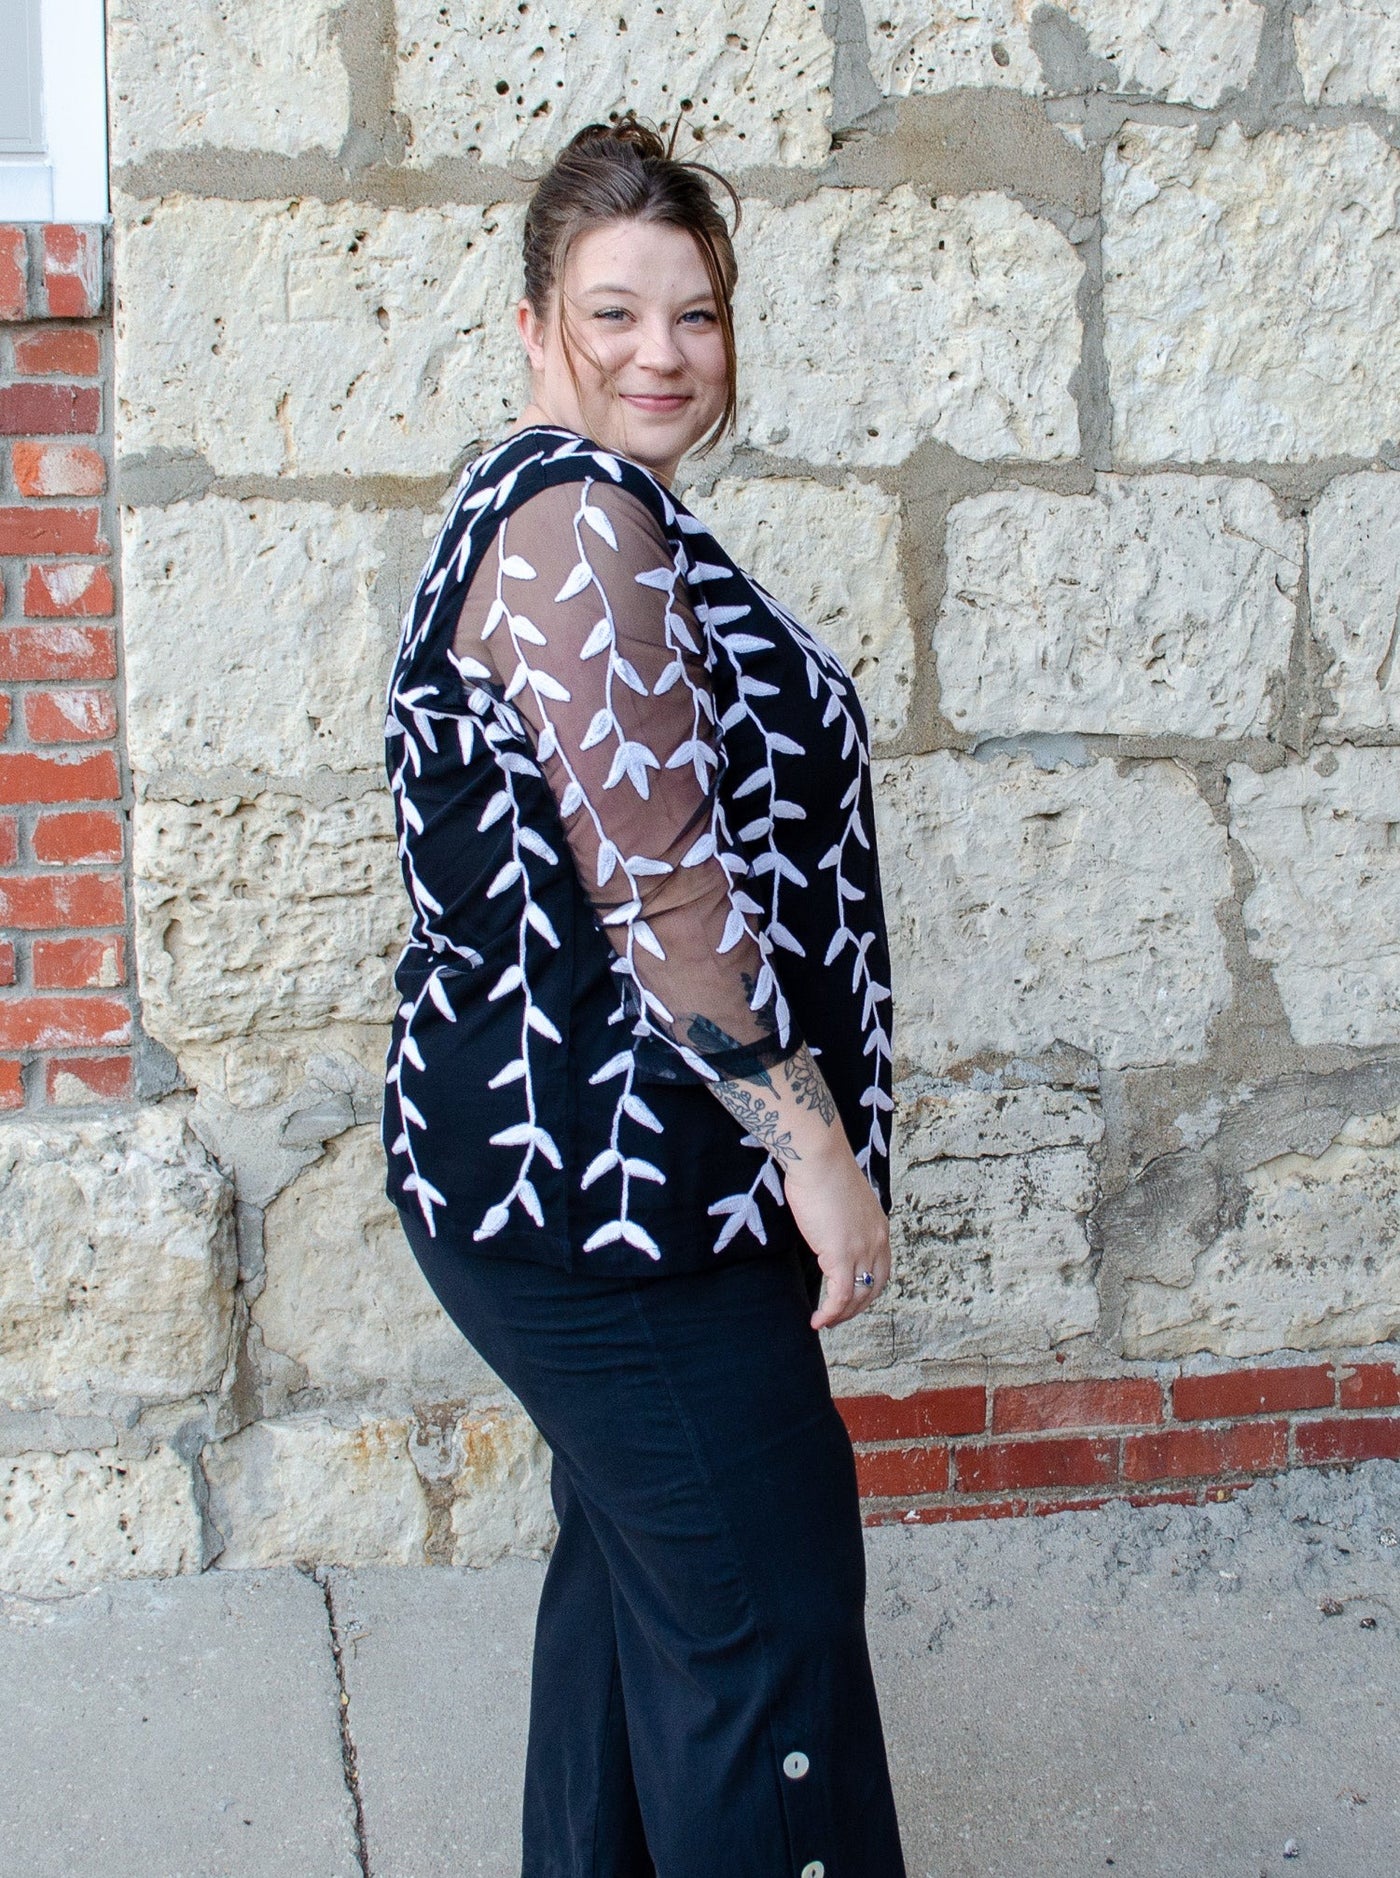 Model is wearing a black and white embroidered long sleeve with sheer fabric on the sleeves. Top is worn with black pants.